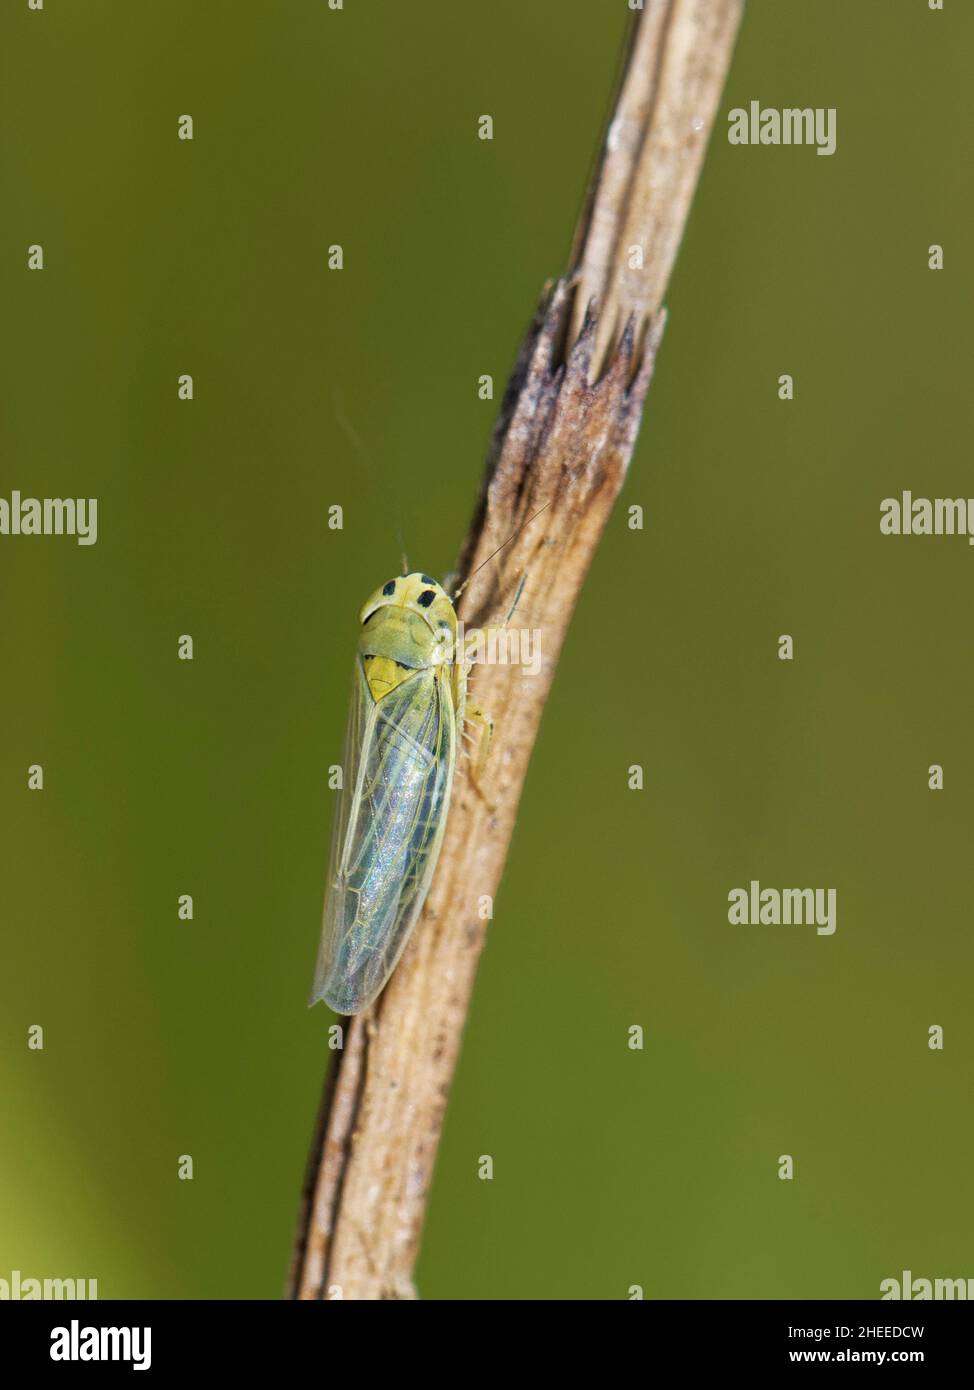 Leafhopper (Cicadula saturata), a sedge feeding species, on a Horsetail stem in a freshwater marsh, Kenfig NNR, Glamorgan, Wales, UK, July Stock Photo